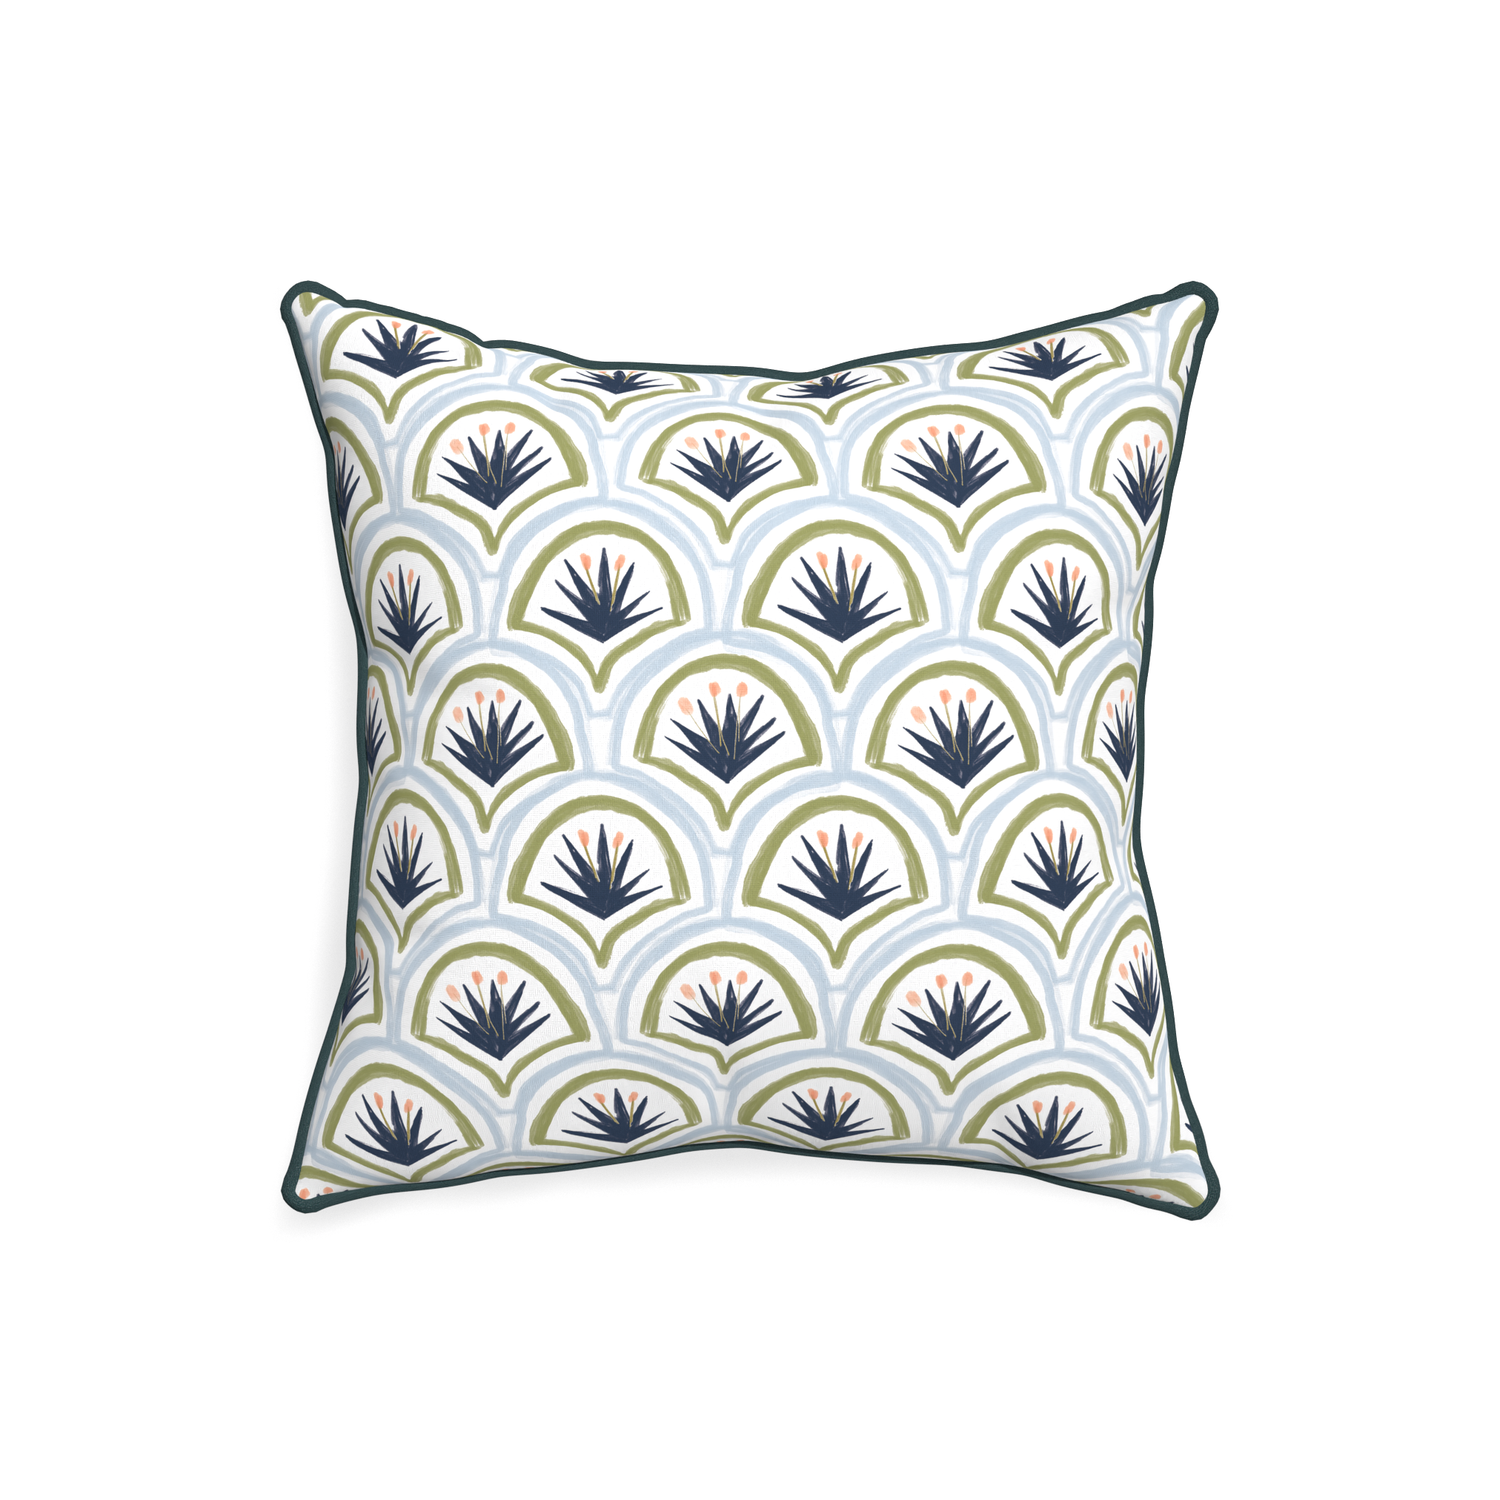 20-square thatcher midnight custom art deco palm patternpillow with p piping on white background